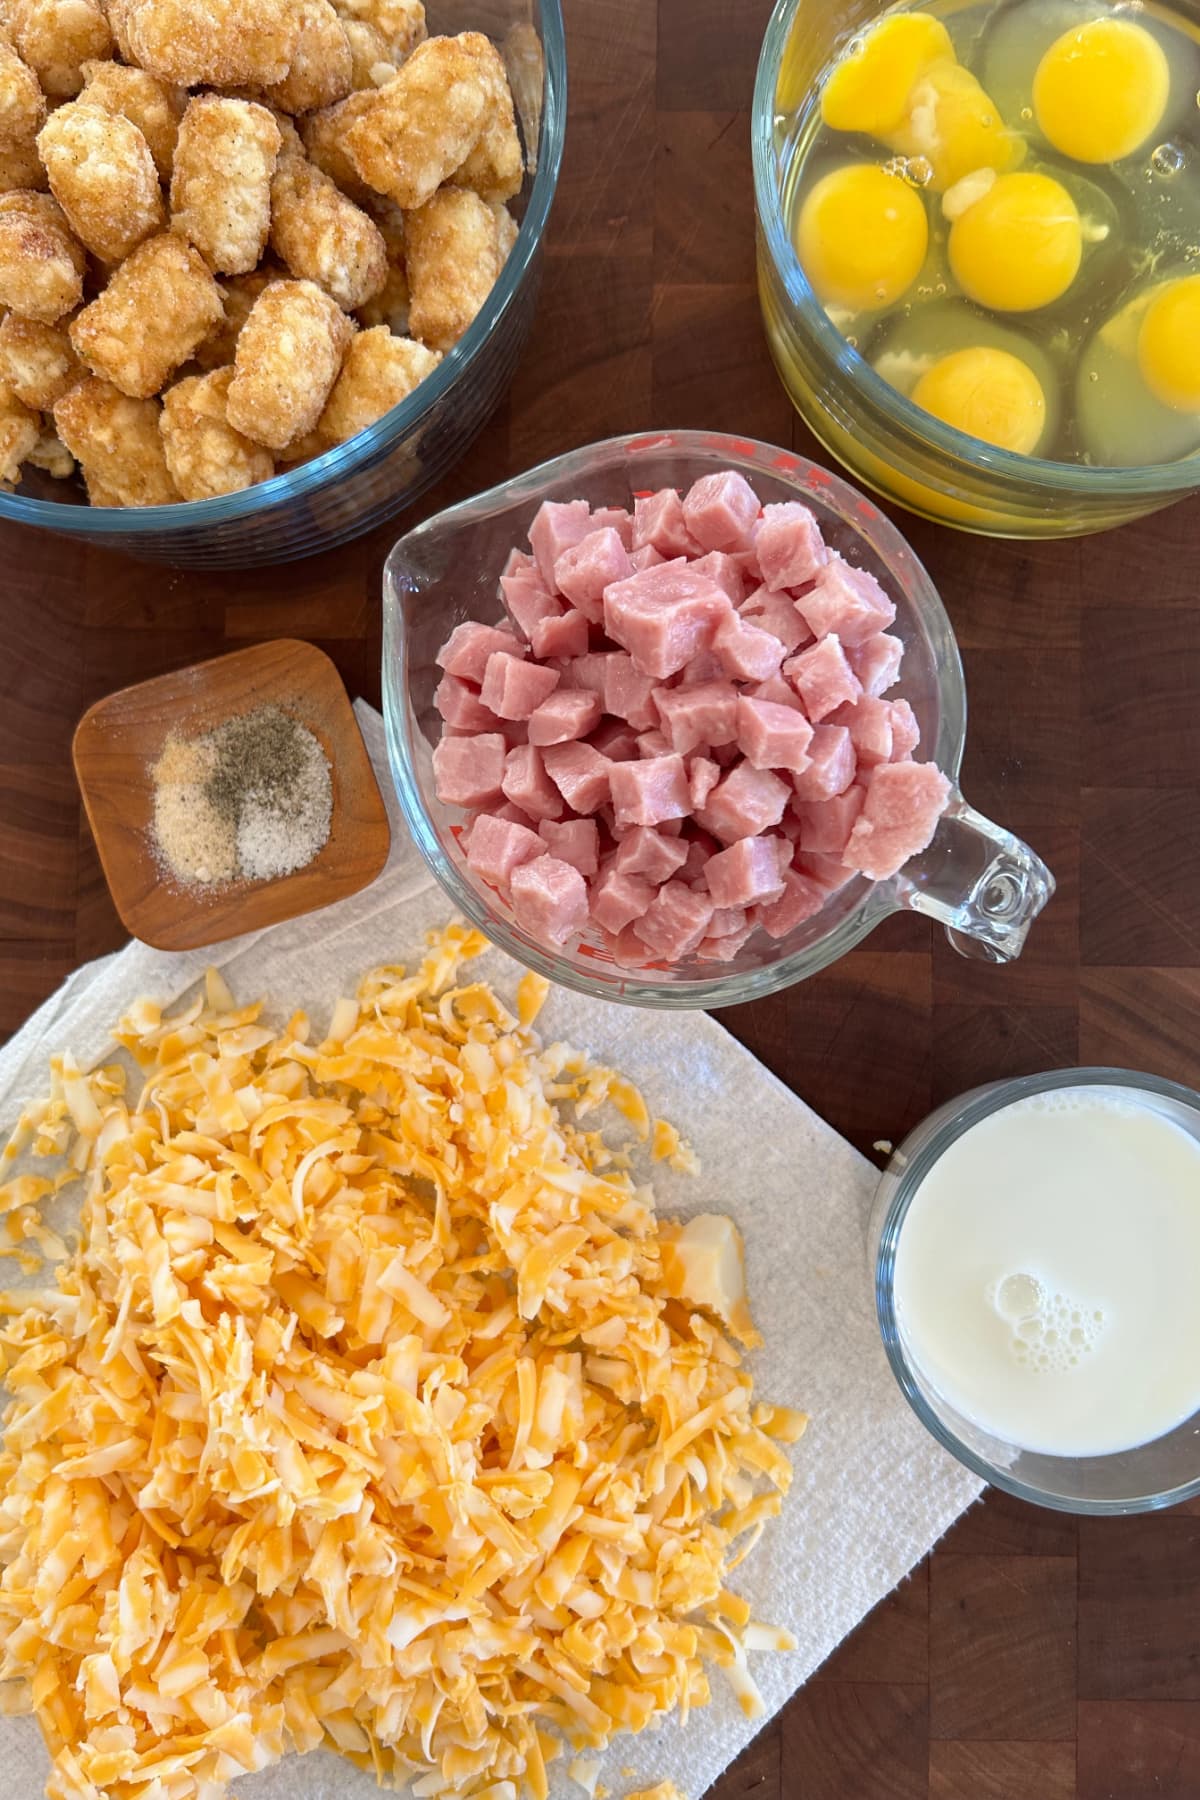 ingredients displayed for making tater tot breakfast casserole